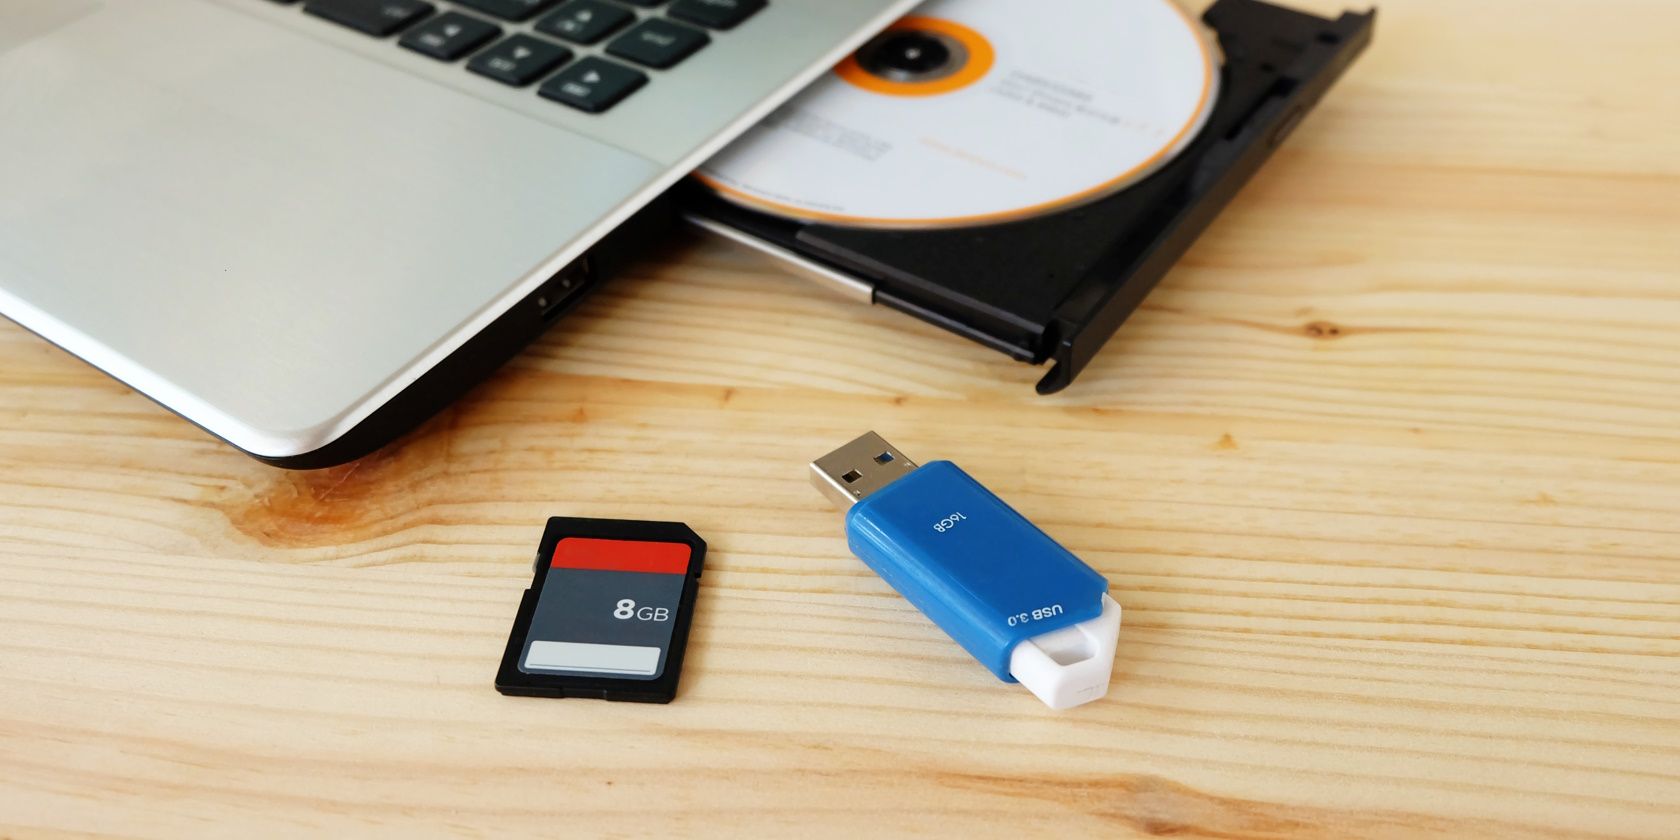 USB stick, disc, and SD card